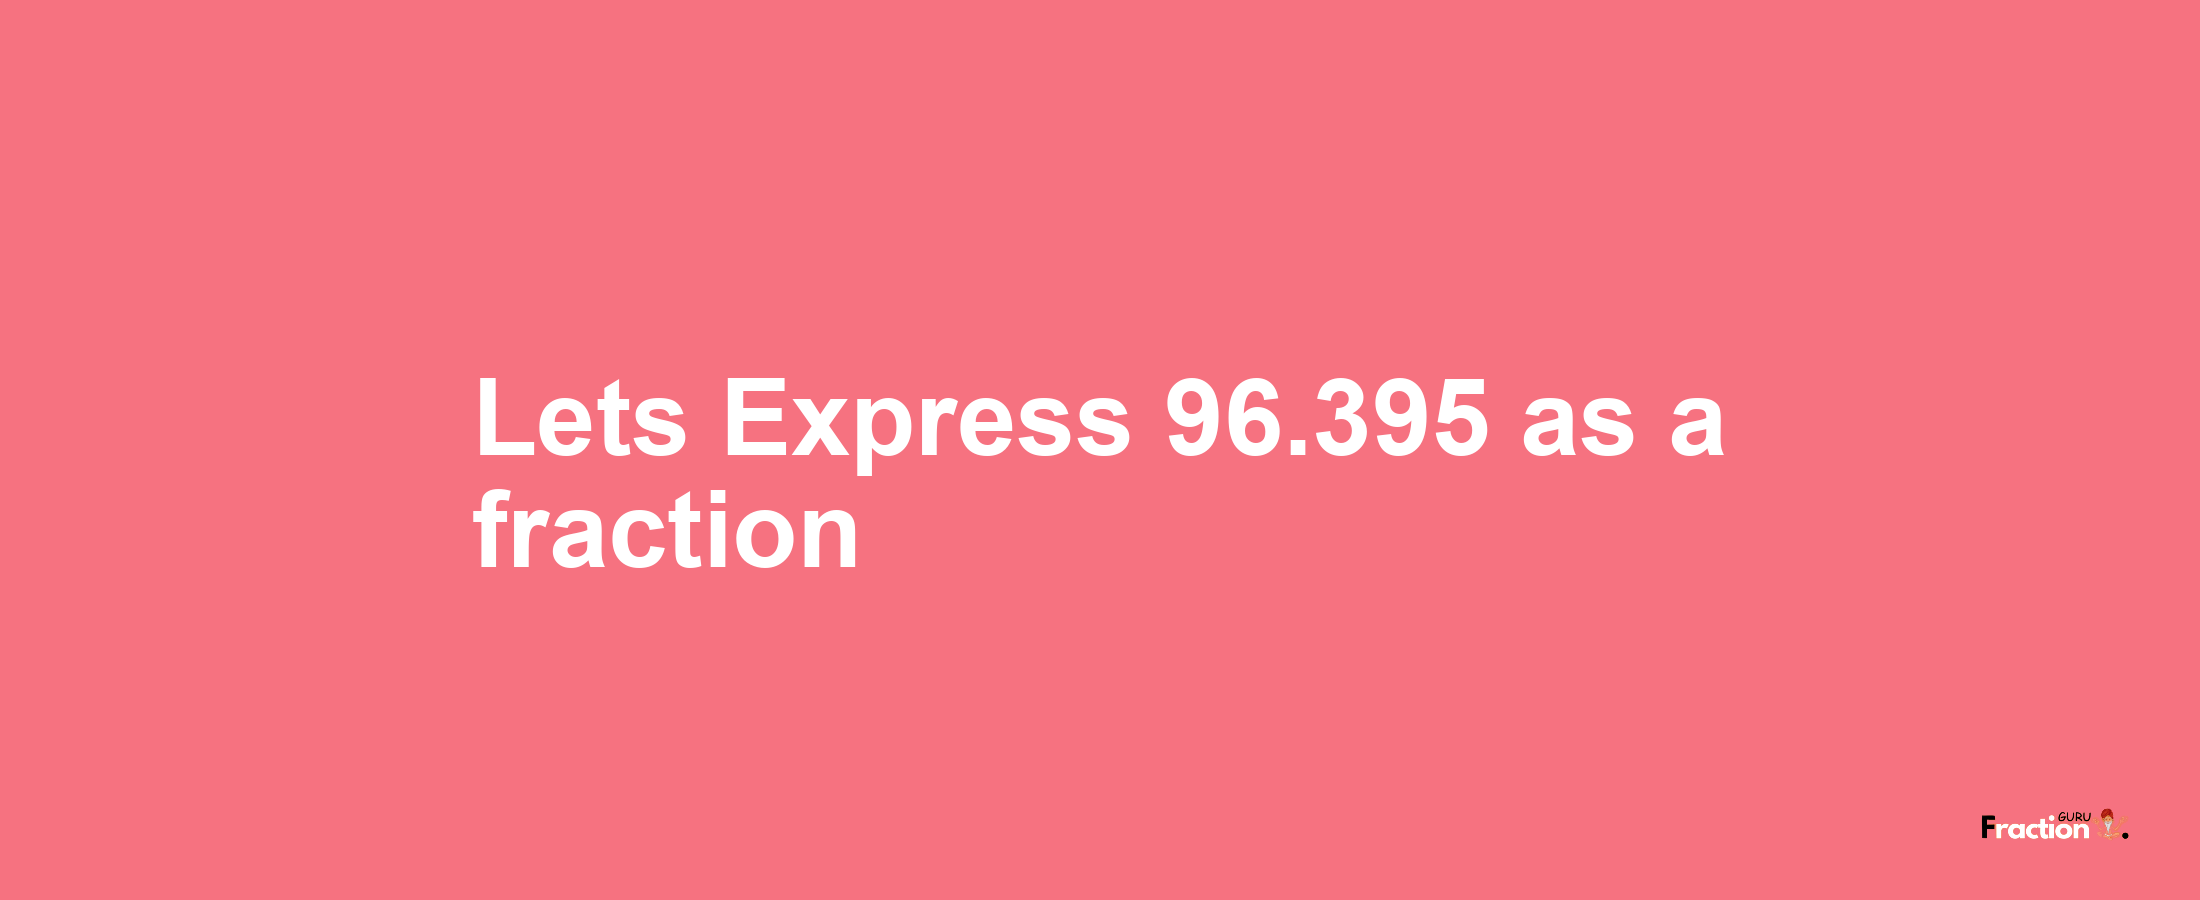 Lets Express 96.395 as afraction